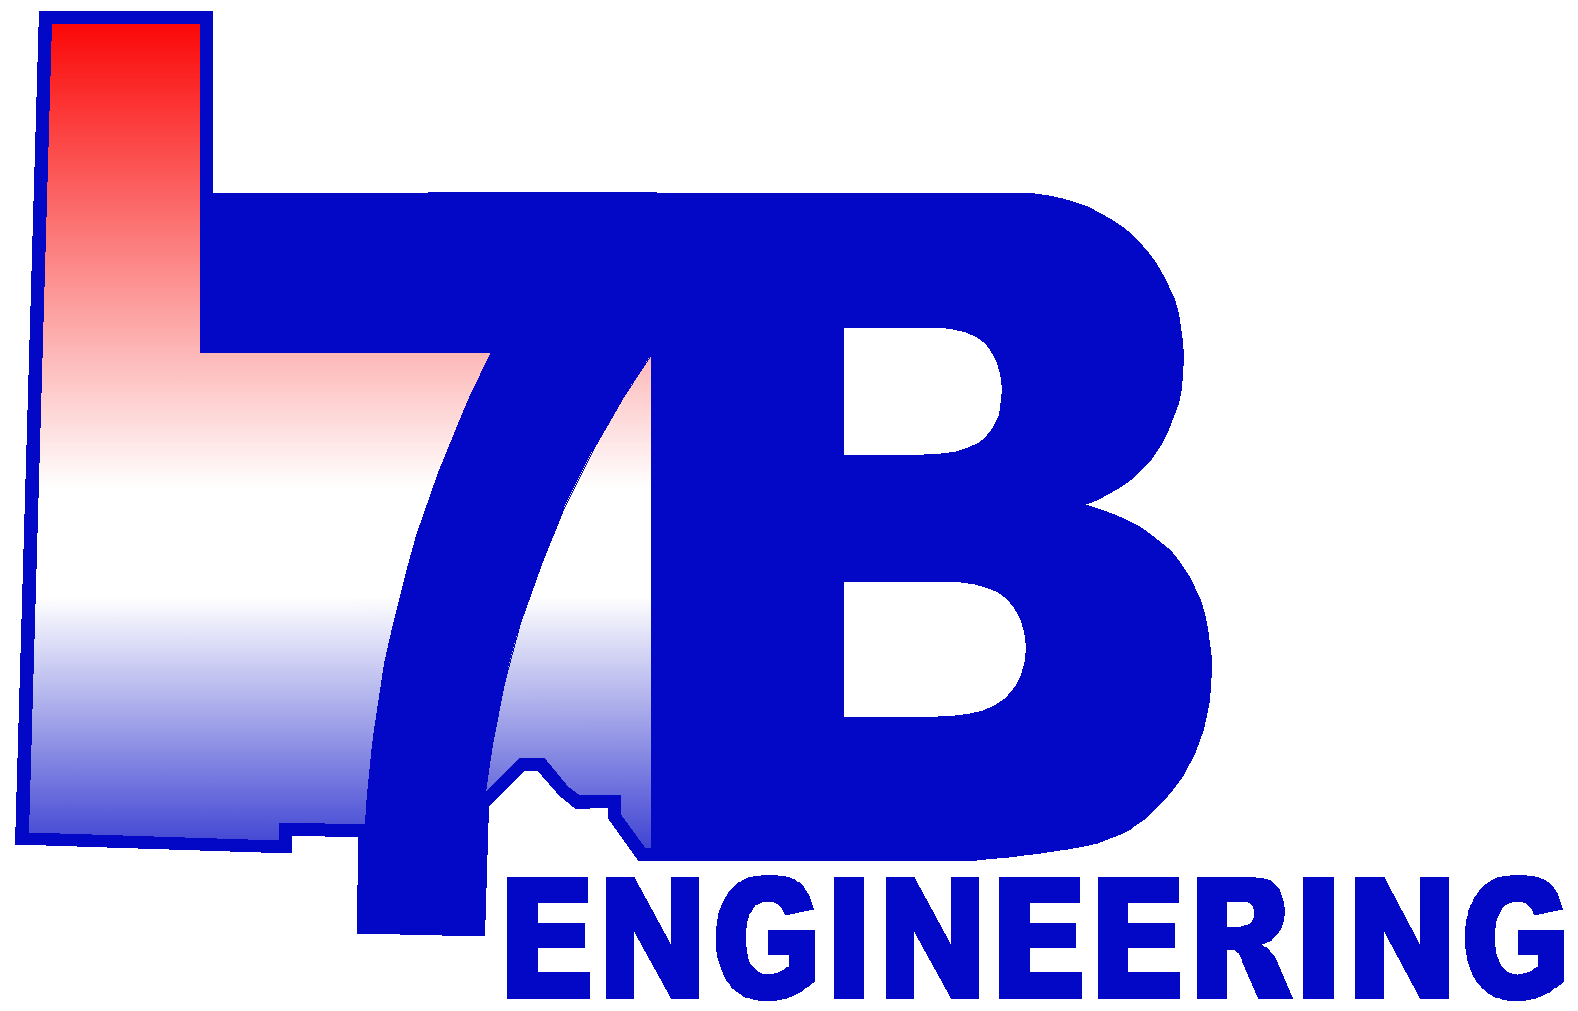 about-us-7b-engineering